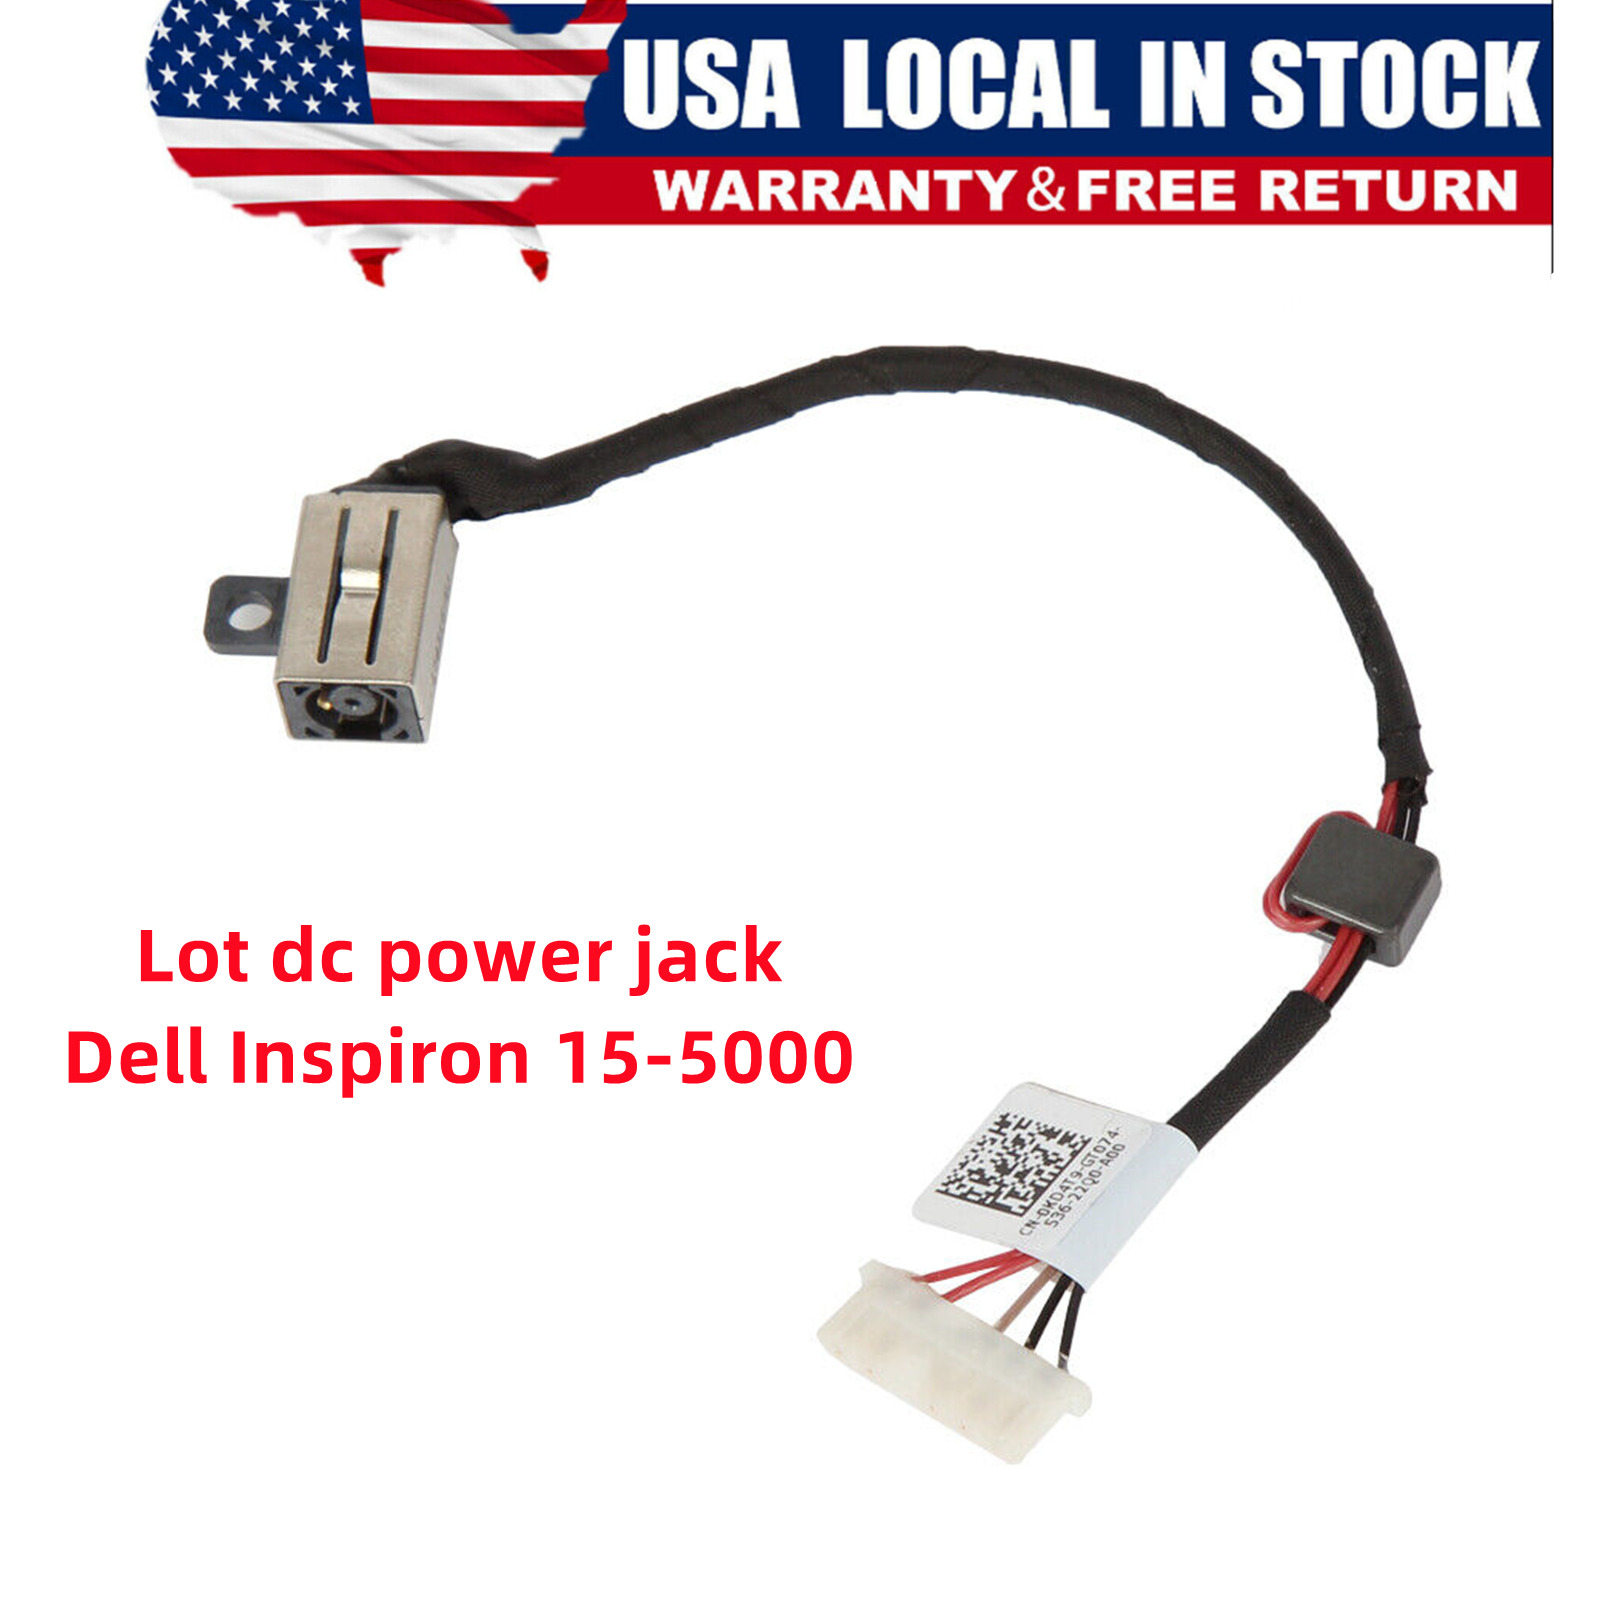 Lot DC Power Jack Cable For Dell Inspiron 15-5000 Charging Port Plug DC30100UD00